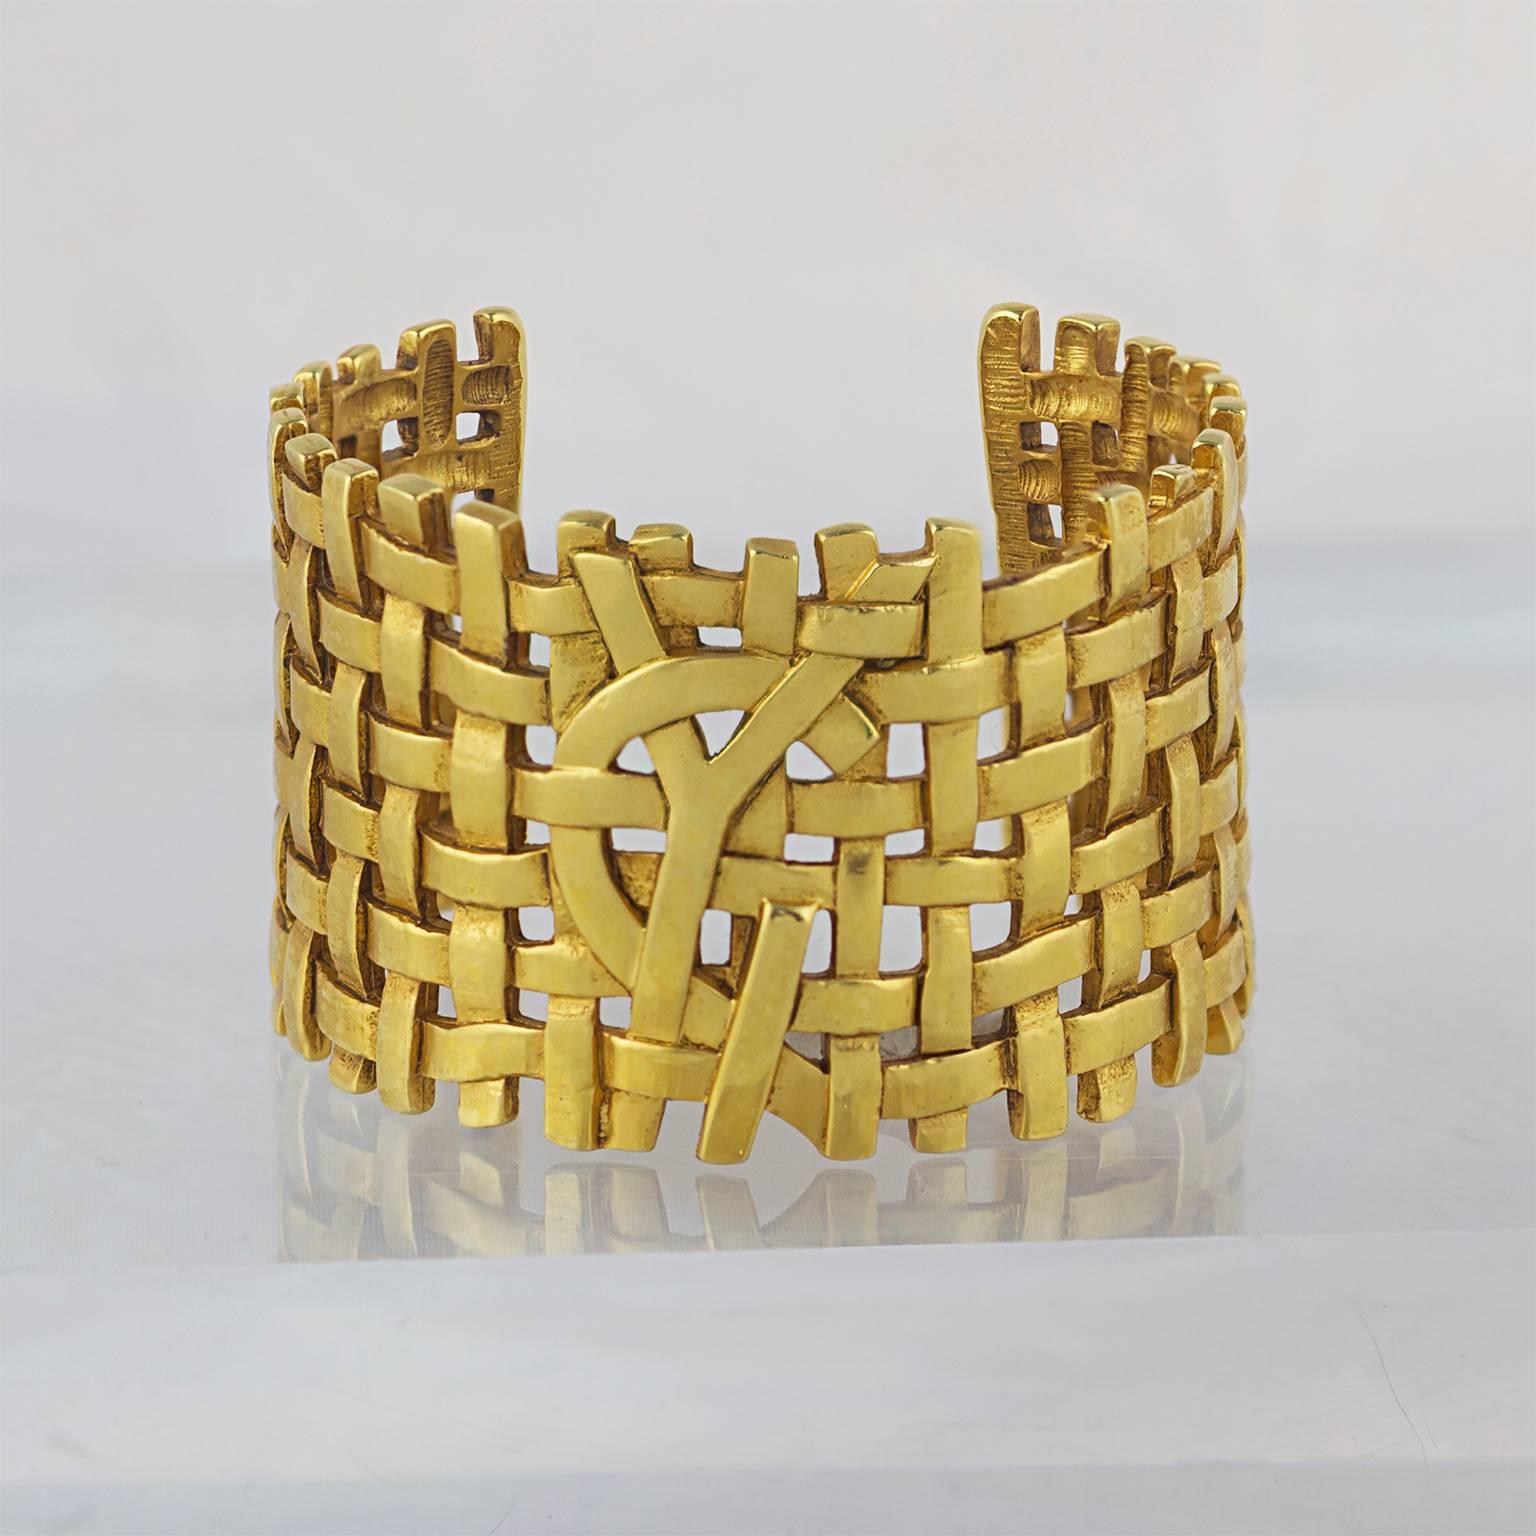 A highly sought after cuff by Yves Saint Laurent with 'hidden' YSL logo, in high carat gold plated metal.
Made in the 1980's.
Fully signed. 
In a great pre-loved condition. 
Don't hesitate to contact us with any queries or image requests.